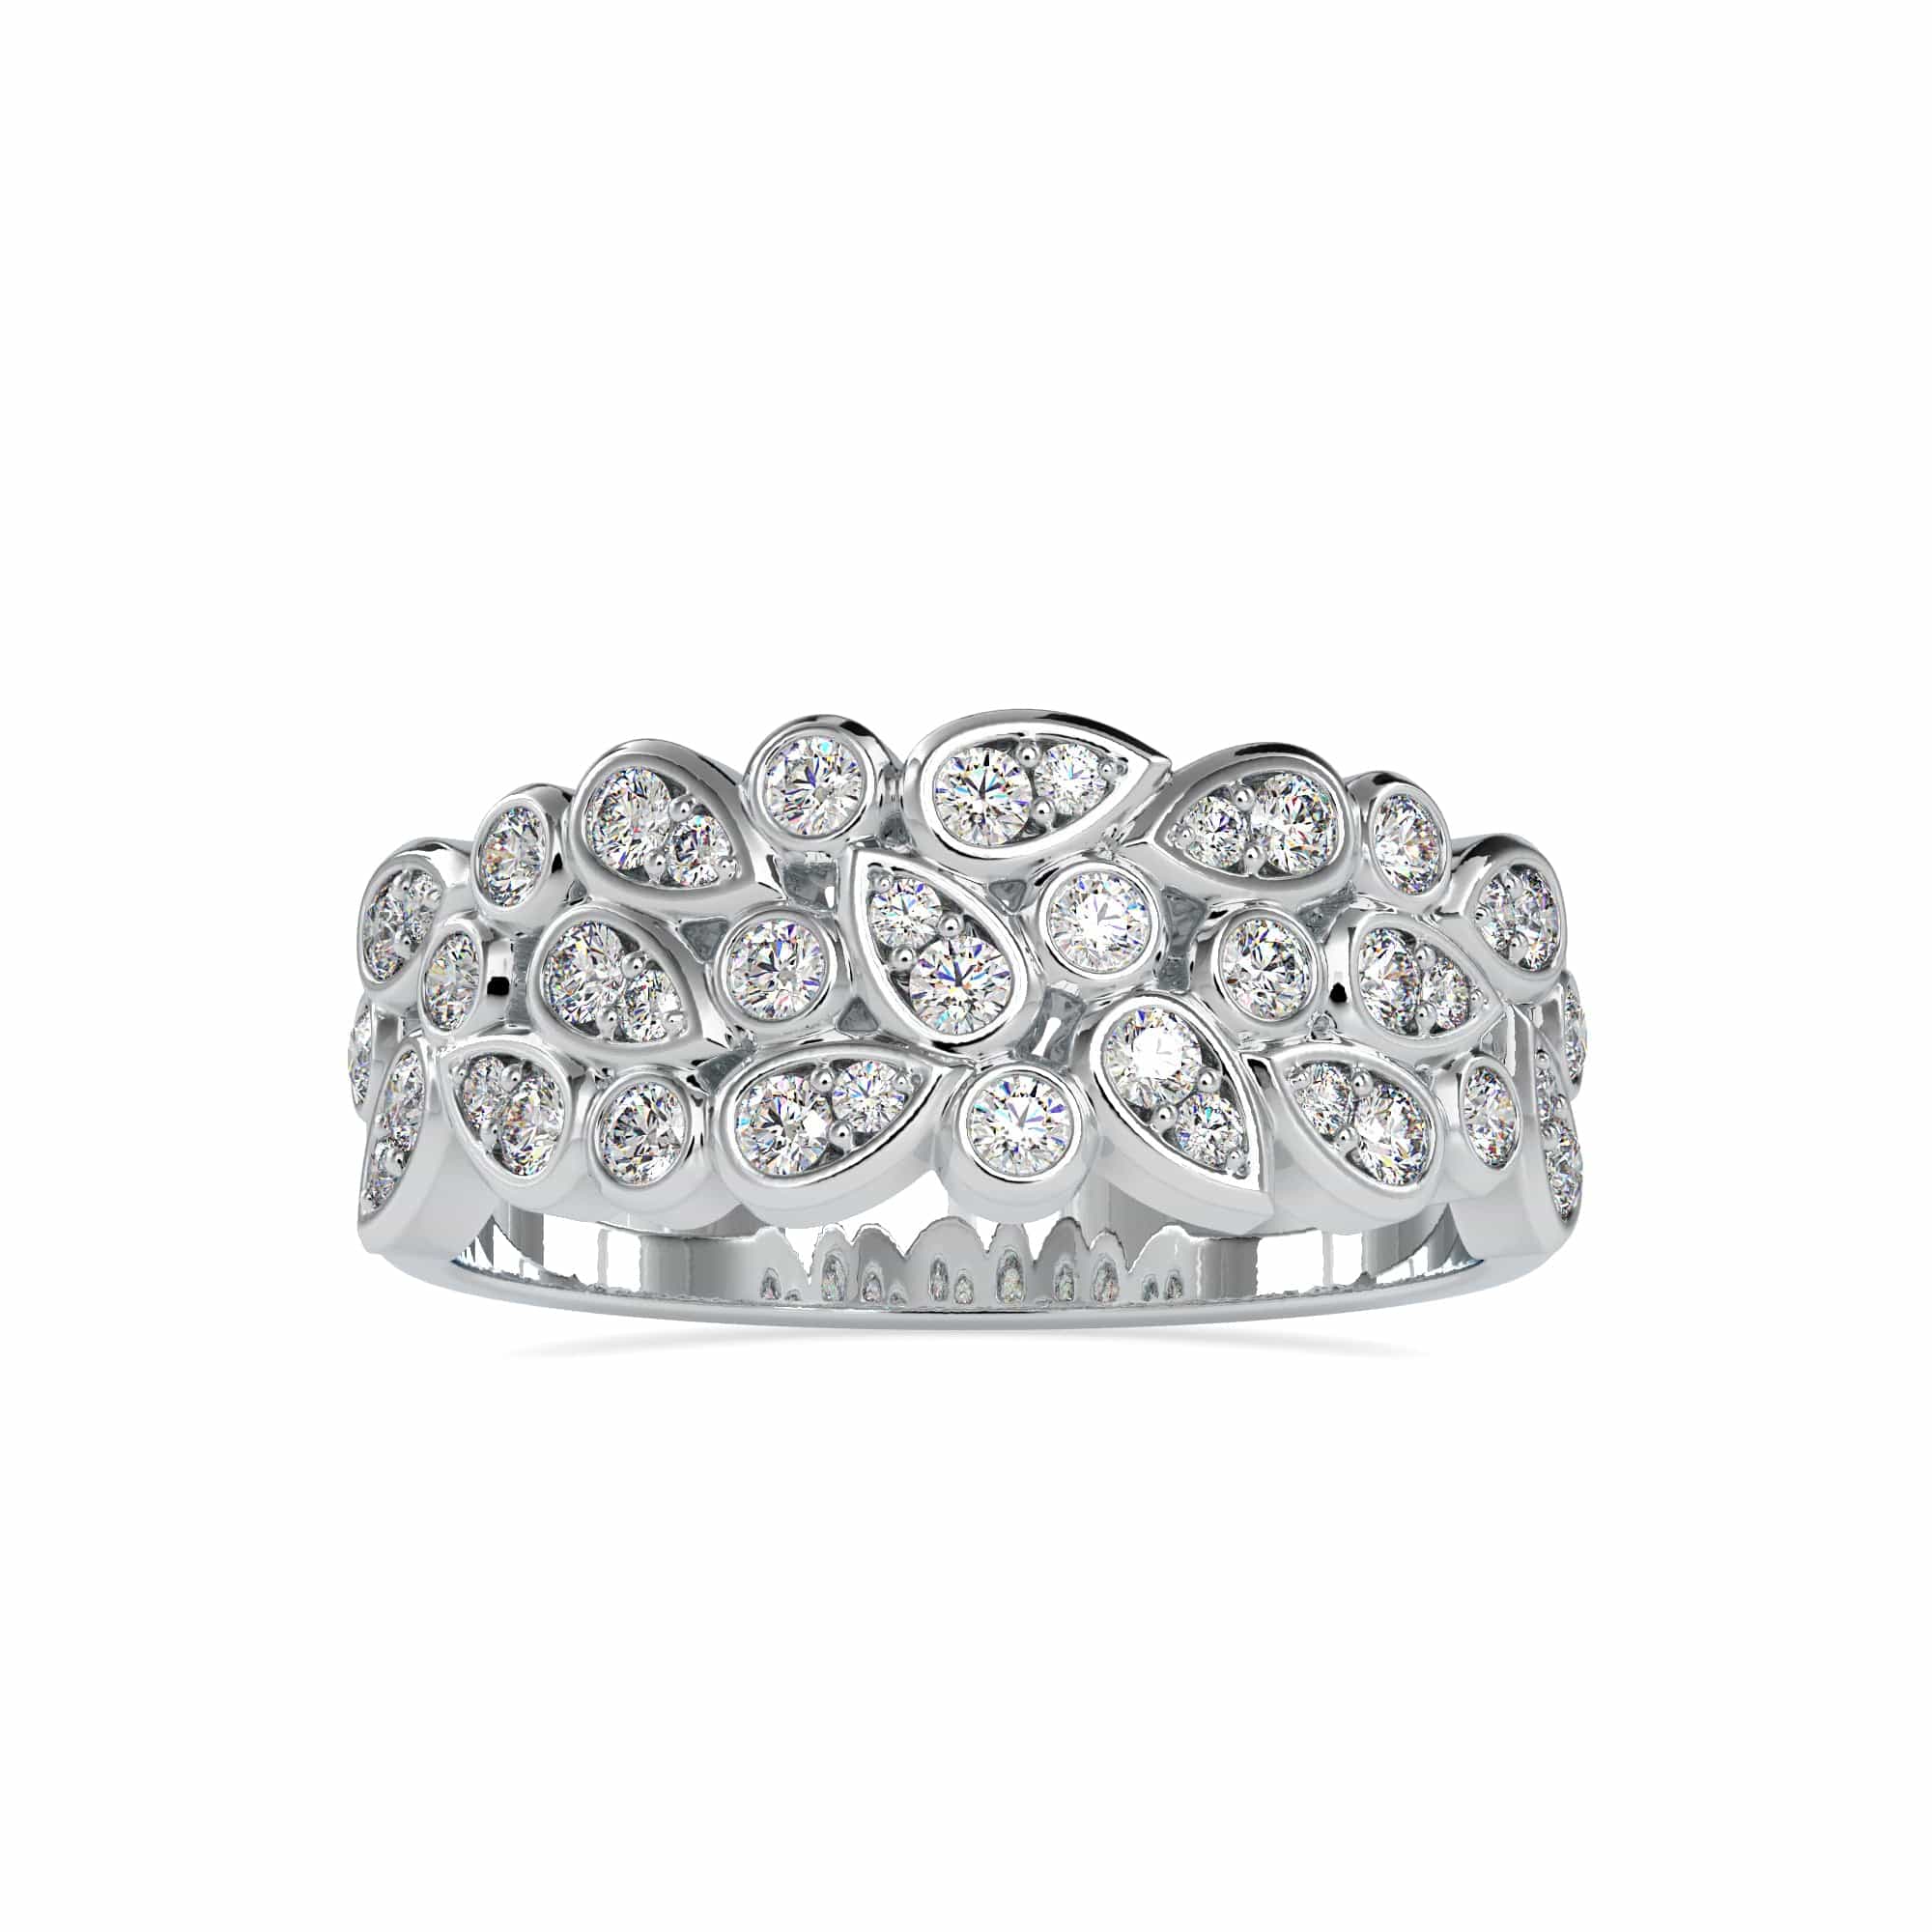 Vintage Five-Row Wide Diamond Band Ring